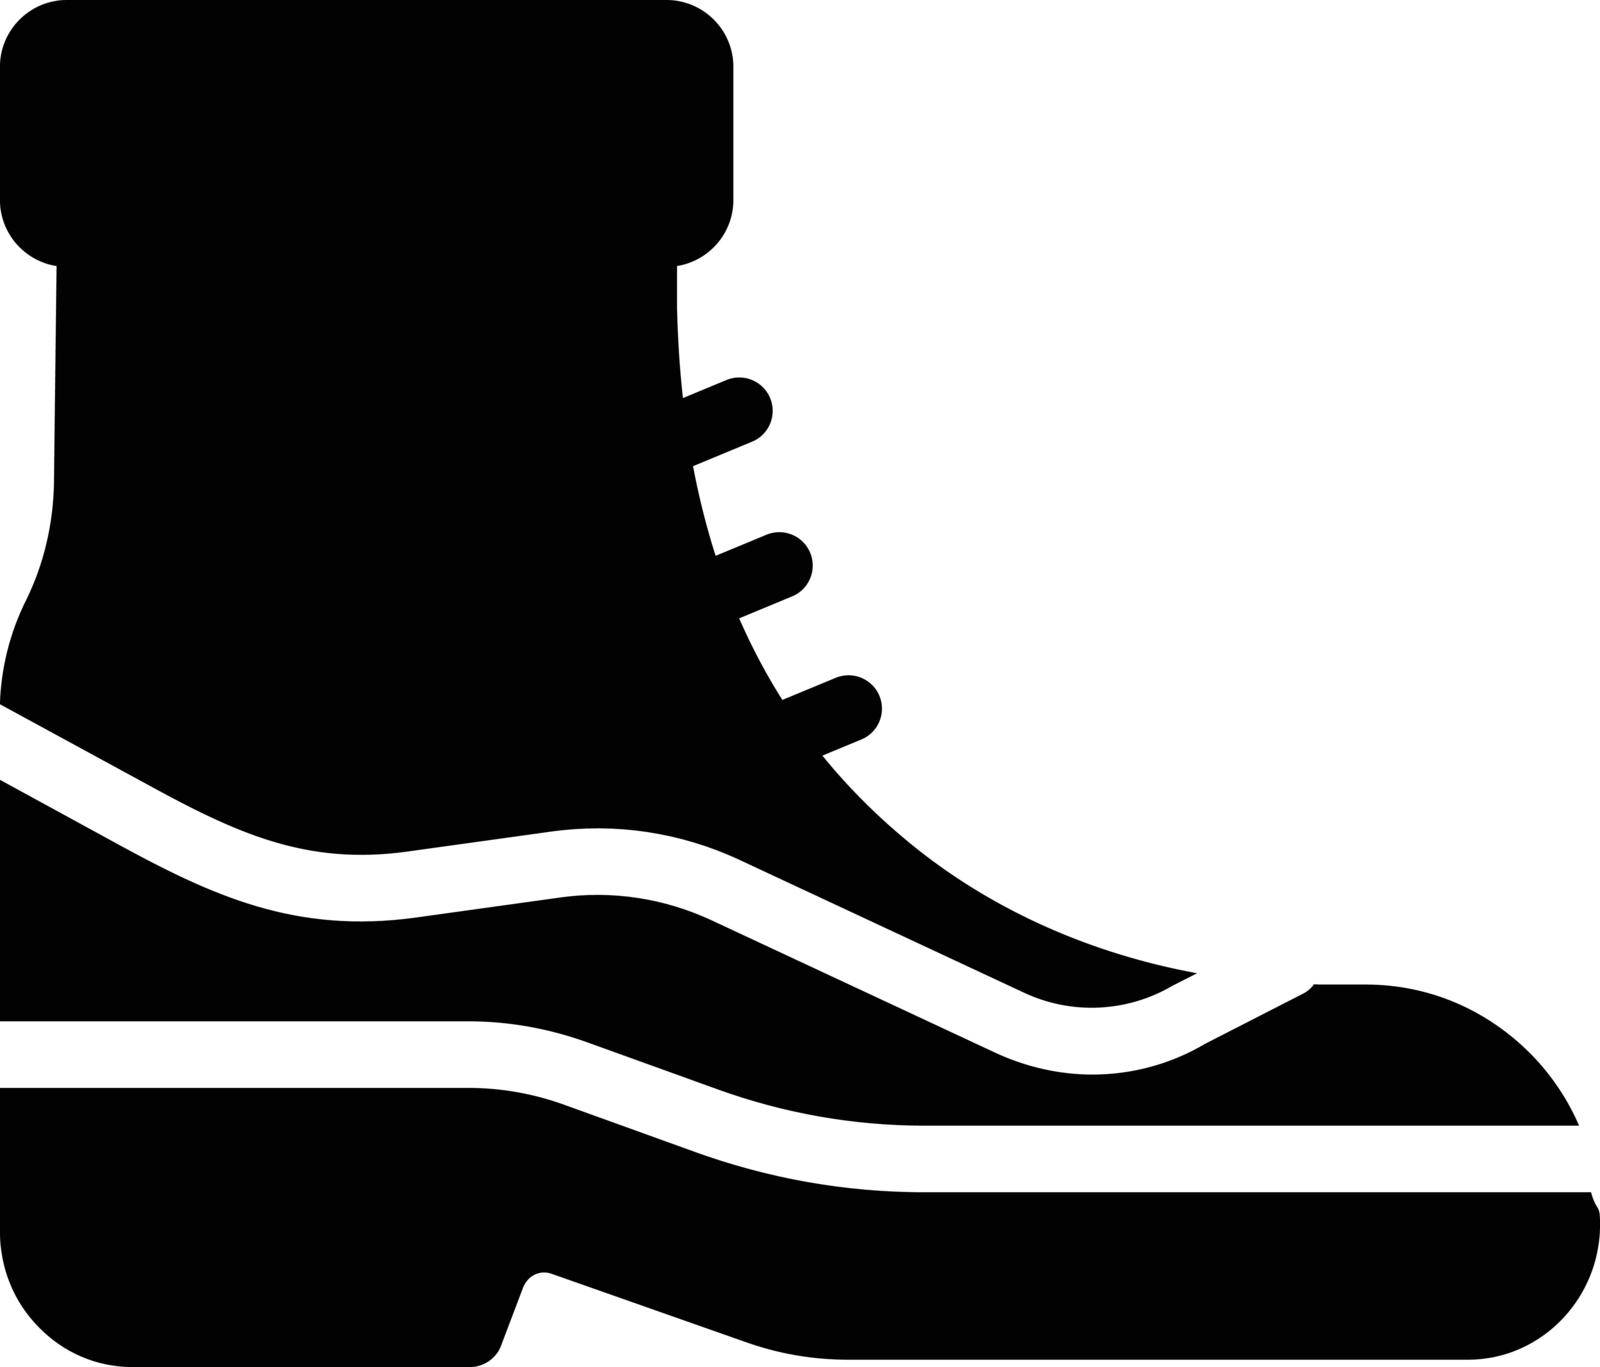 footwear Vector illustration on a transparent background. Premium quality symmbols. Glyphs vector icons for concept and graphic design.